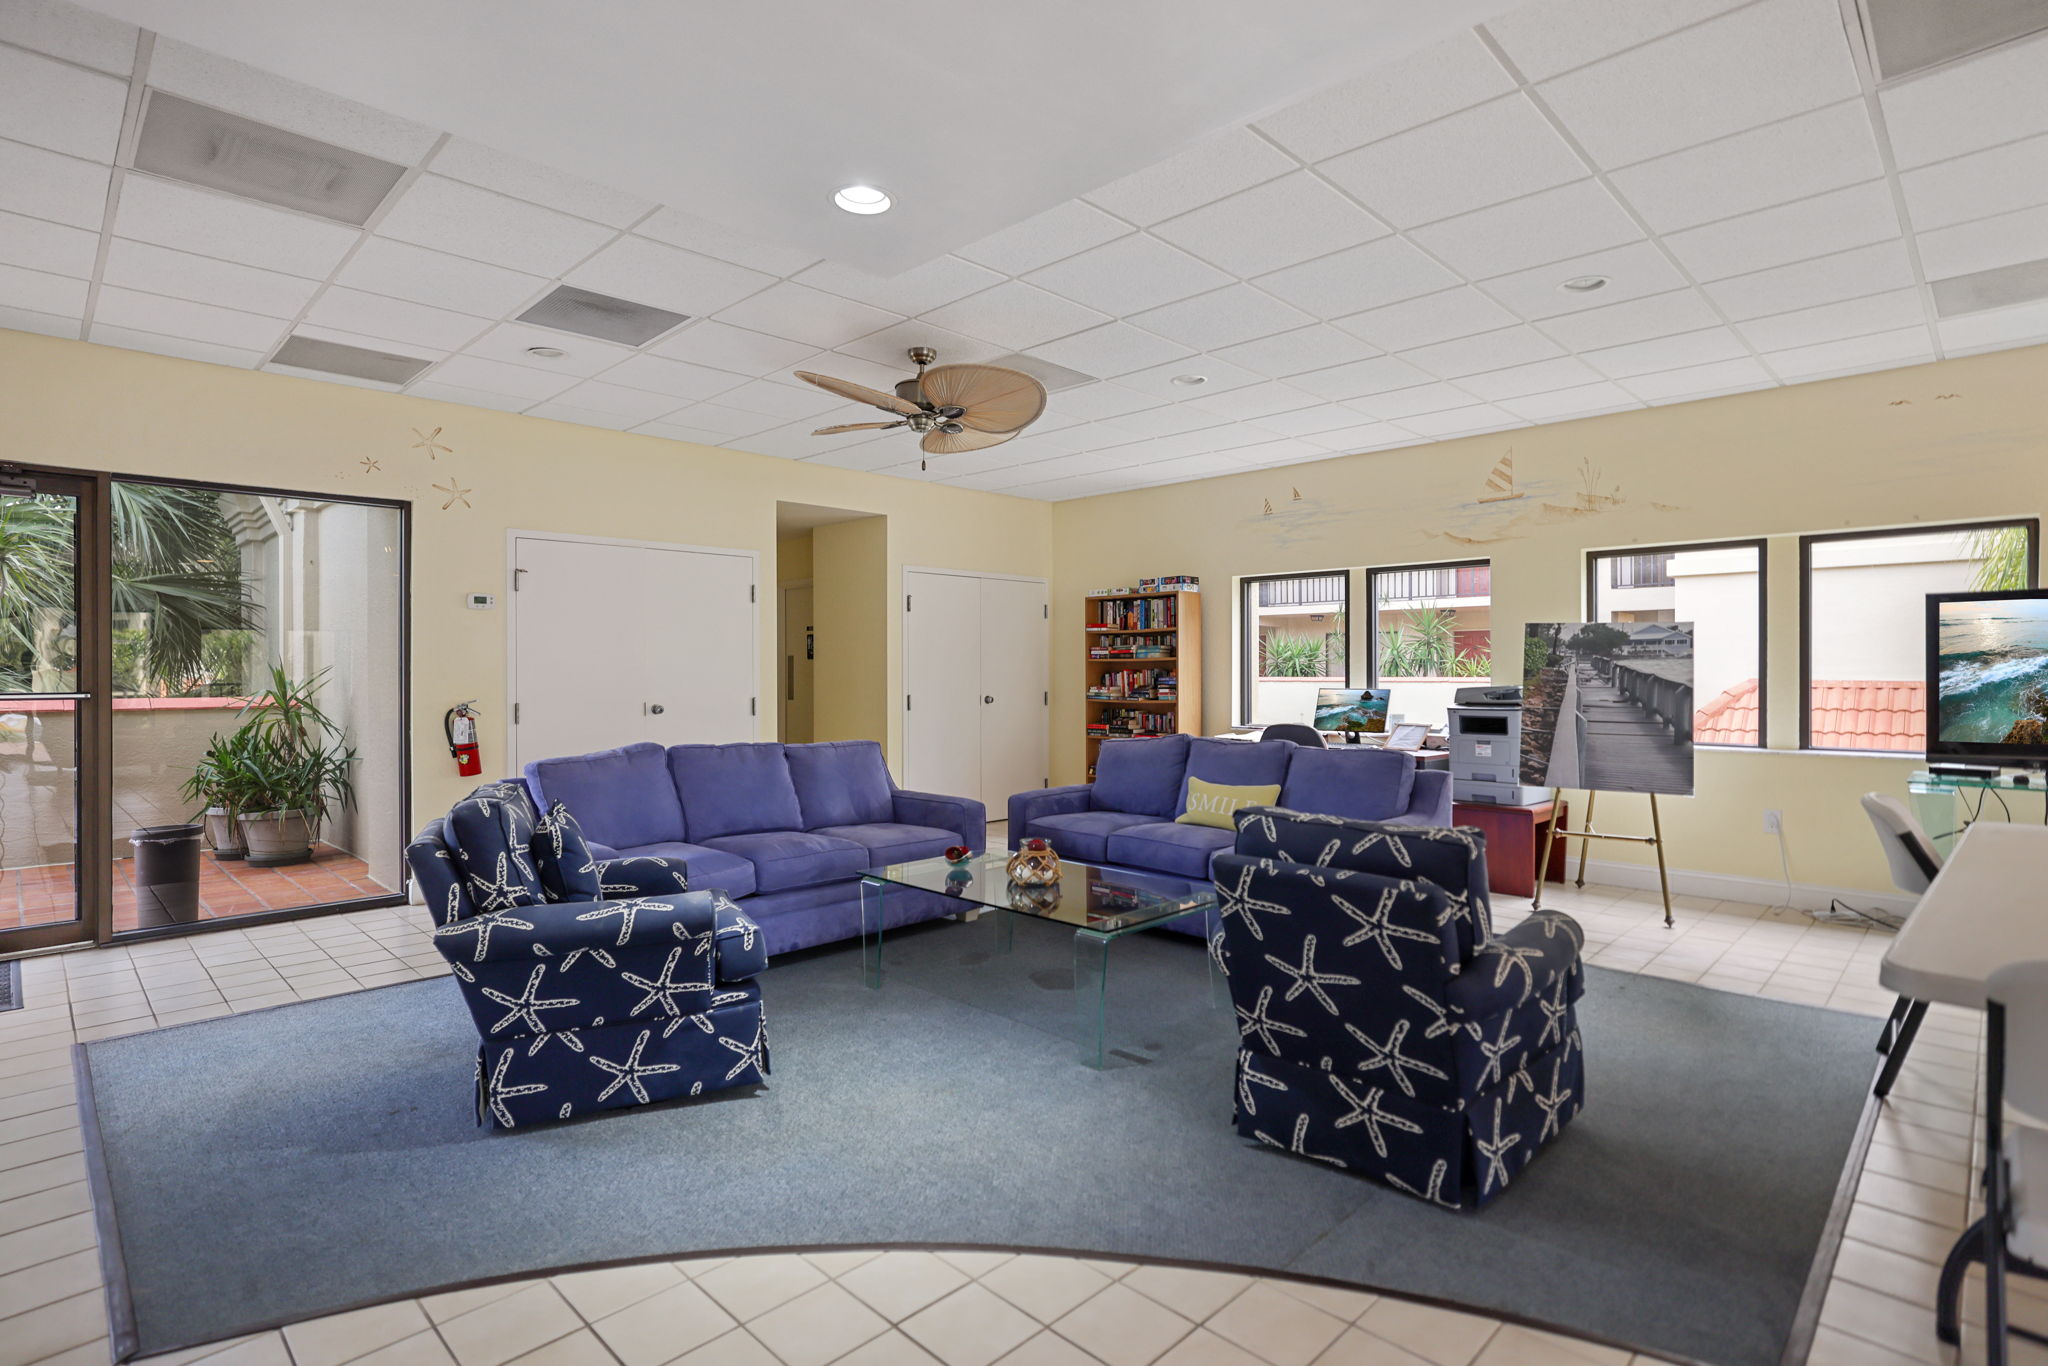 Community Clubhouse Interior - 495A5748 (1)